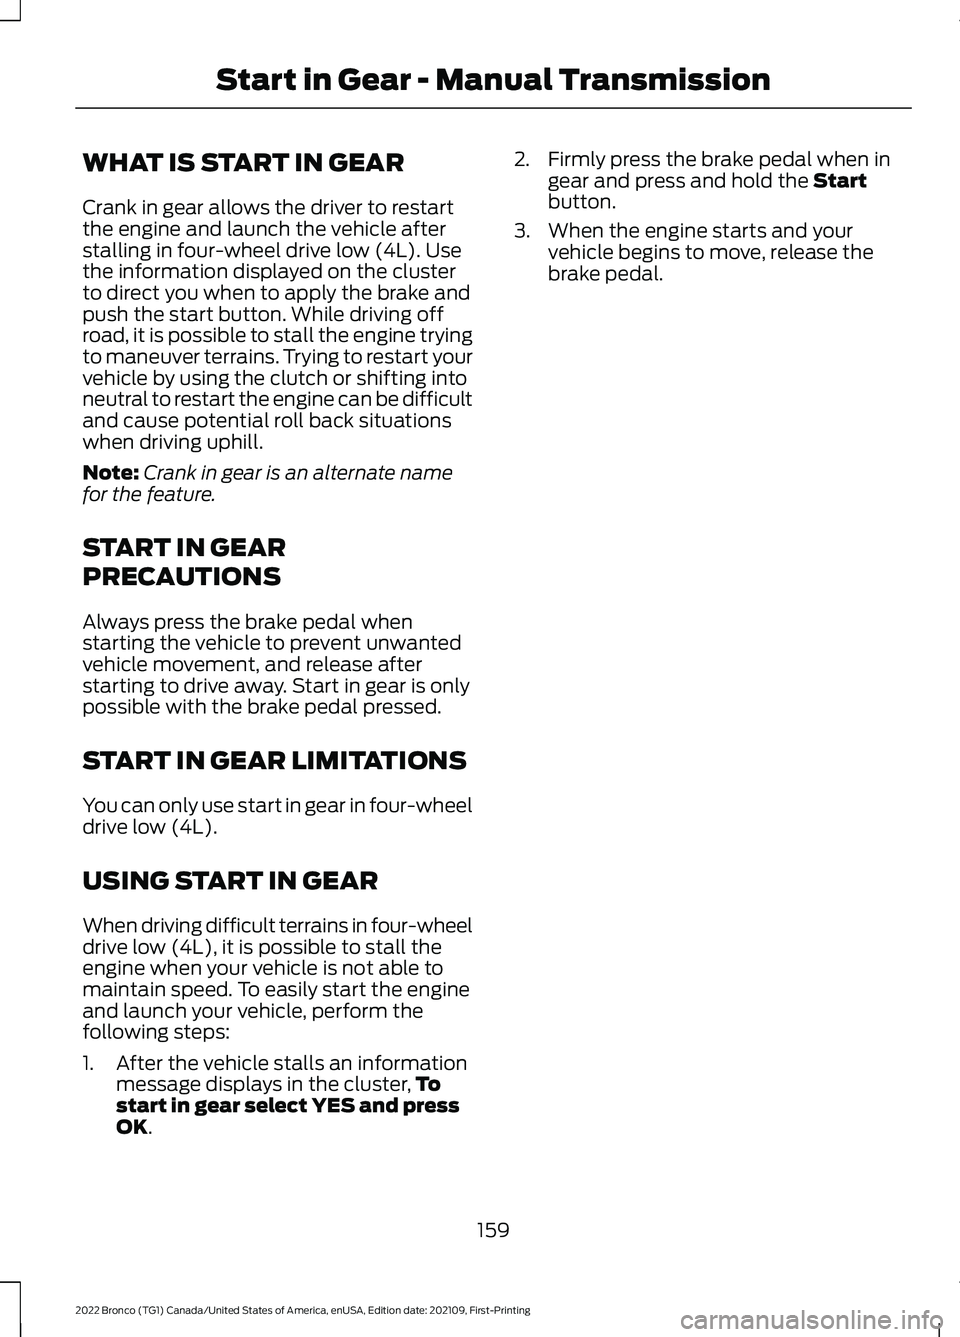 FORD BRONCO 2022  Owners Manual WHAT IS START IN GEAR
Crank in gear allows the driver to restartthe engine and launch the vehicle afterstalling in four-wheel drive low (4L). Usethe information displayed on the clusterto direct you w